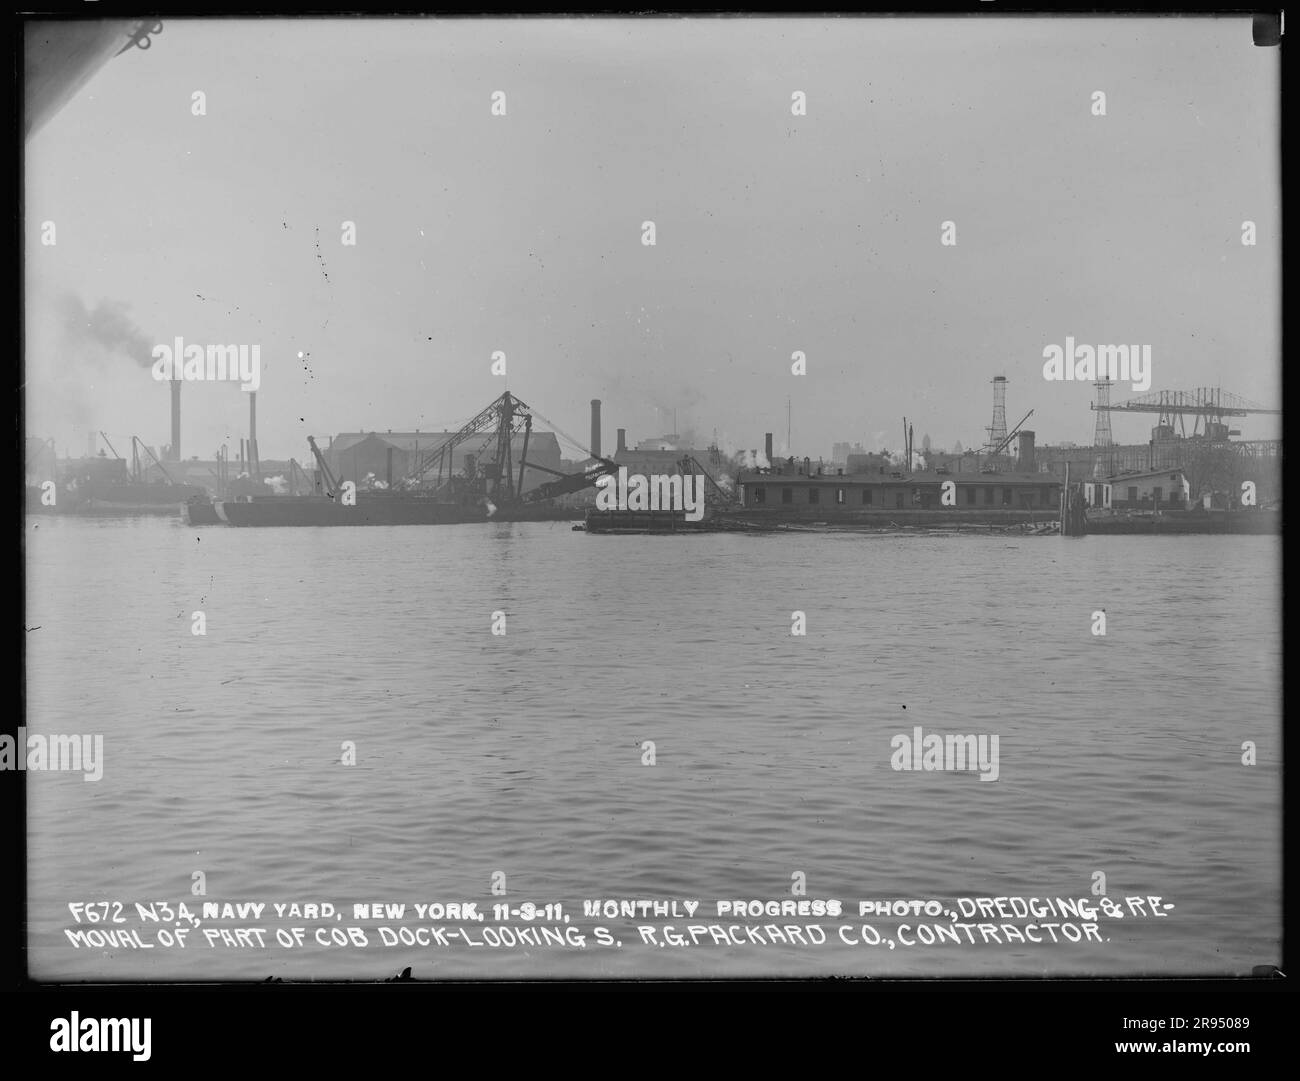 Monthly Progress Photo, Dredging and Removal of Part of Cob Dock, Looking South, R. G. Packard Company, Contractor. Glass Plate Negatives of the Construction and Repair of Buildings, Facilities, and Vessels at the New York Navy Yard. Stock Photo